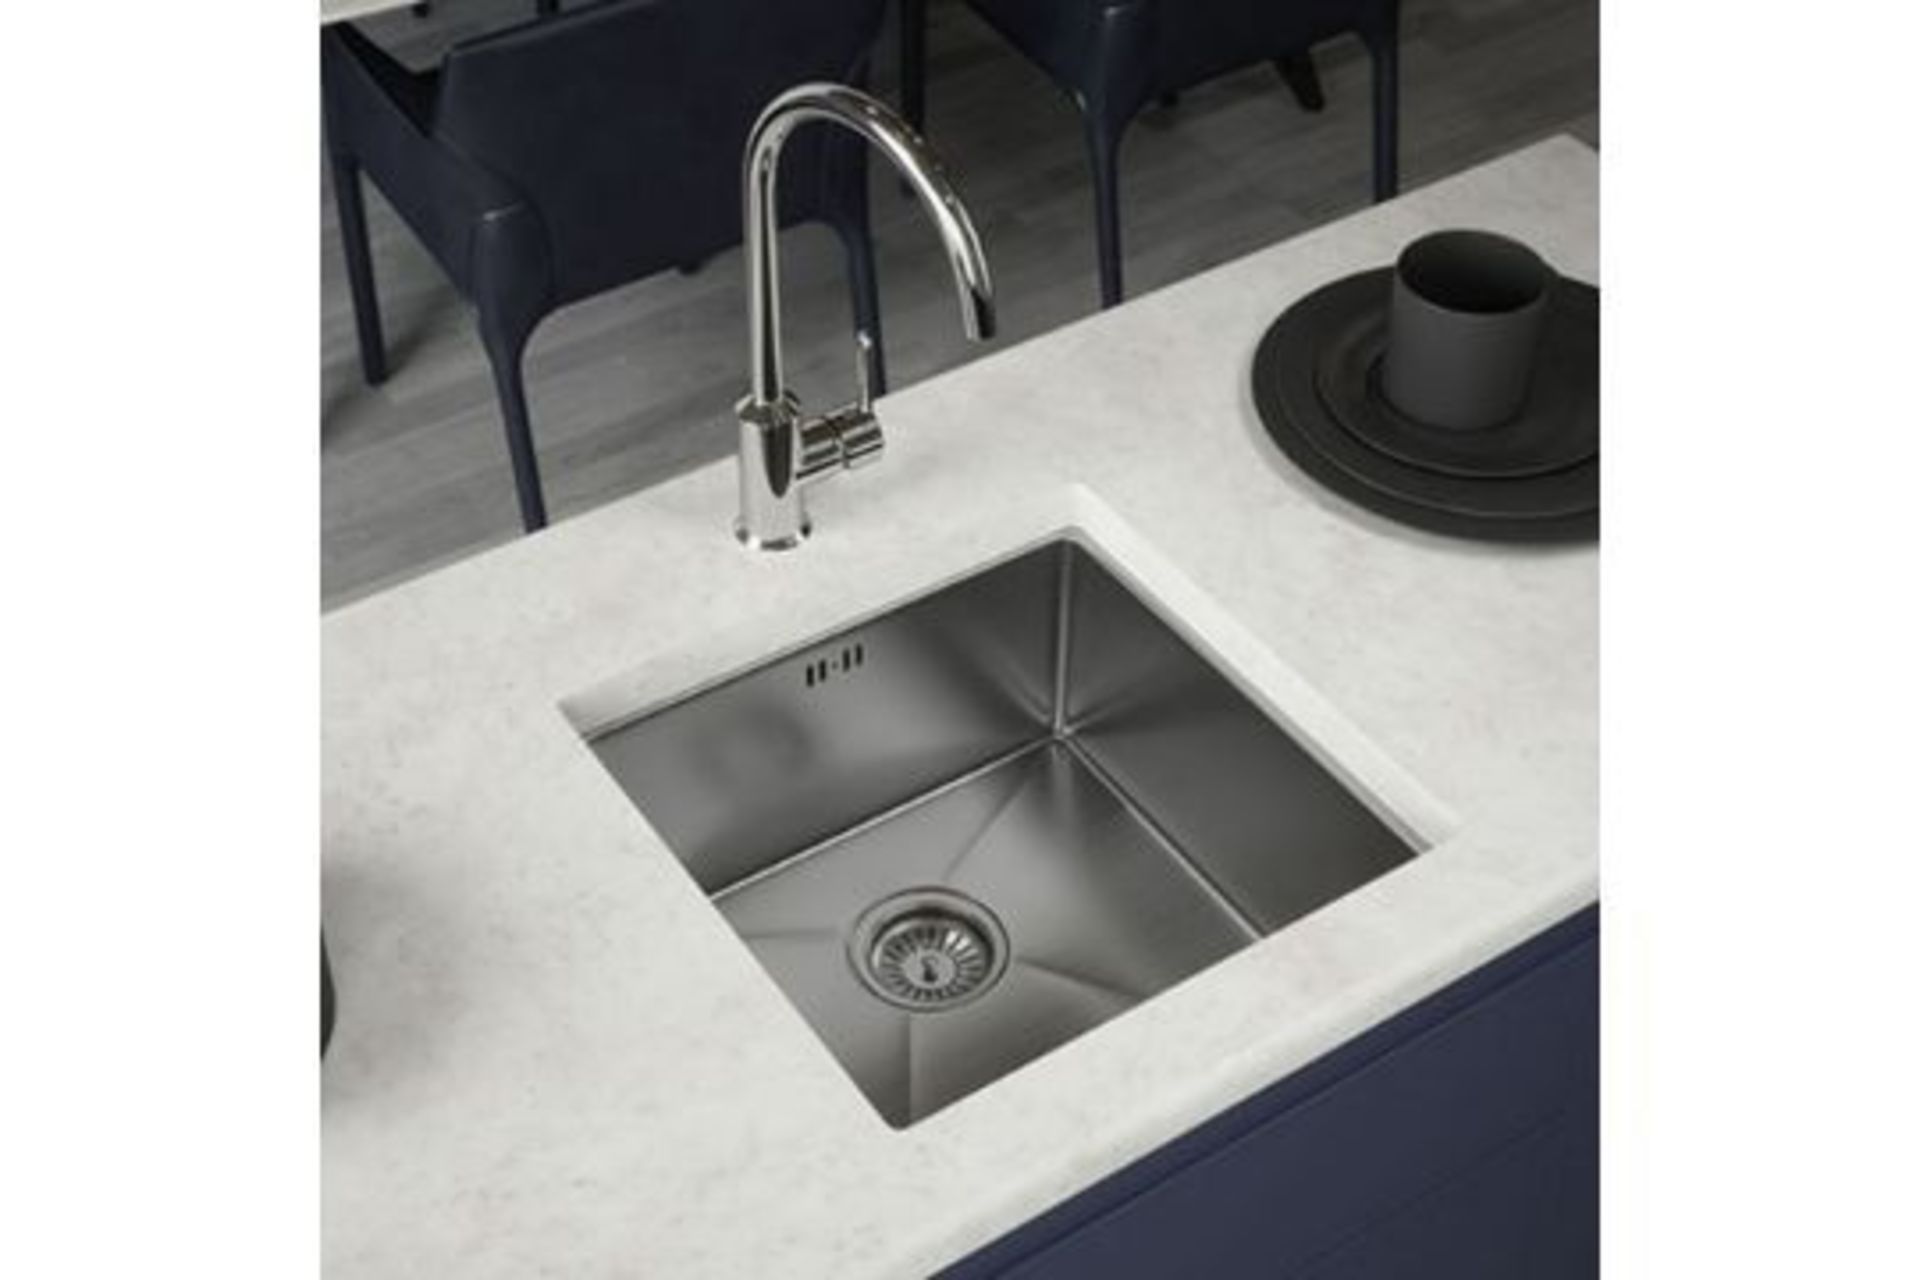 NEW BOXED LAMONA BY FRANKE Venice 1.0 Bowl Inset or Undermount Stainless Steel Kitchen Sink. (